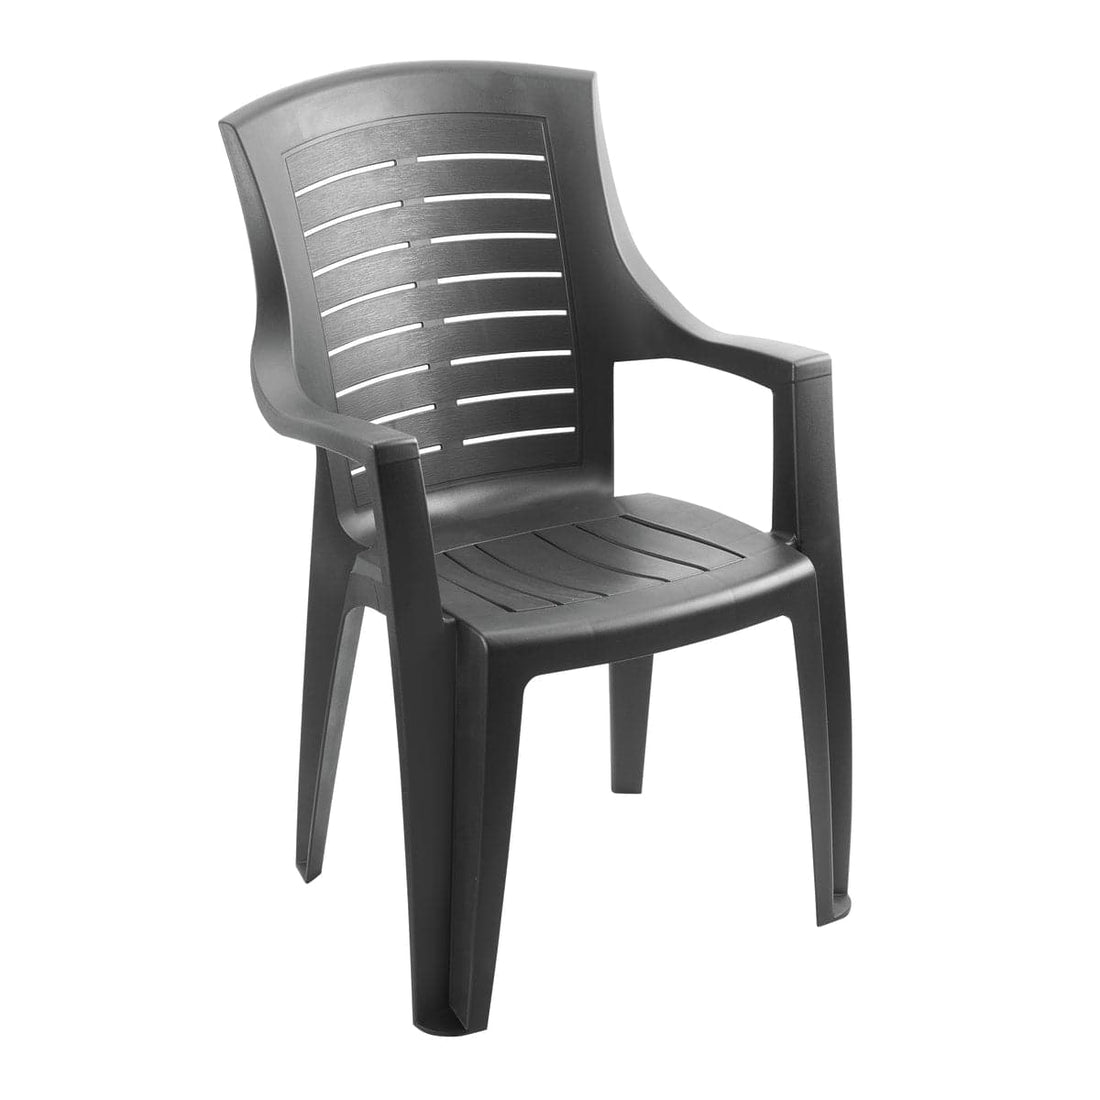 TALIA ANTHRACITE STACKING CHAIR - best price from Maltashopper.com BR500015667